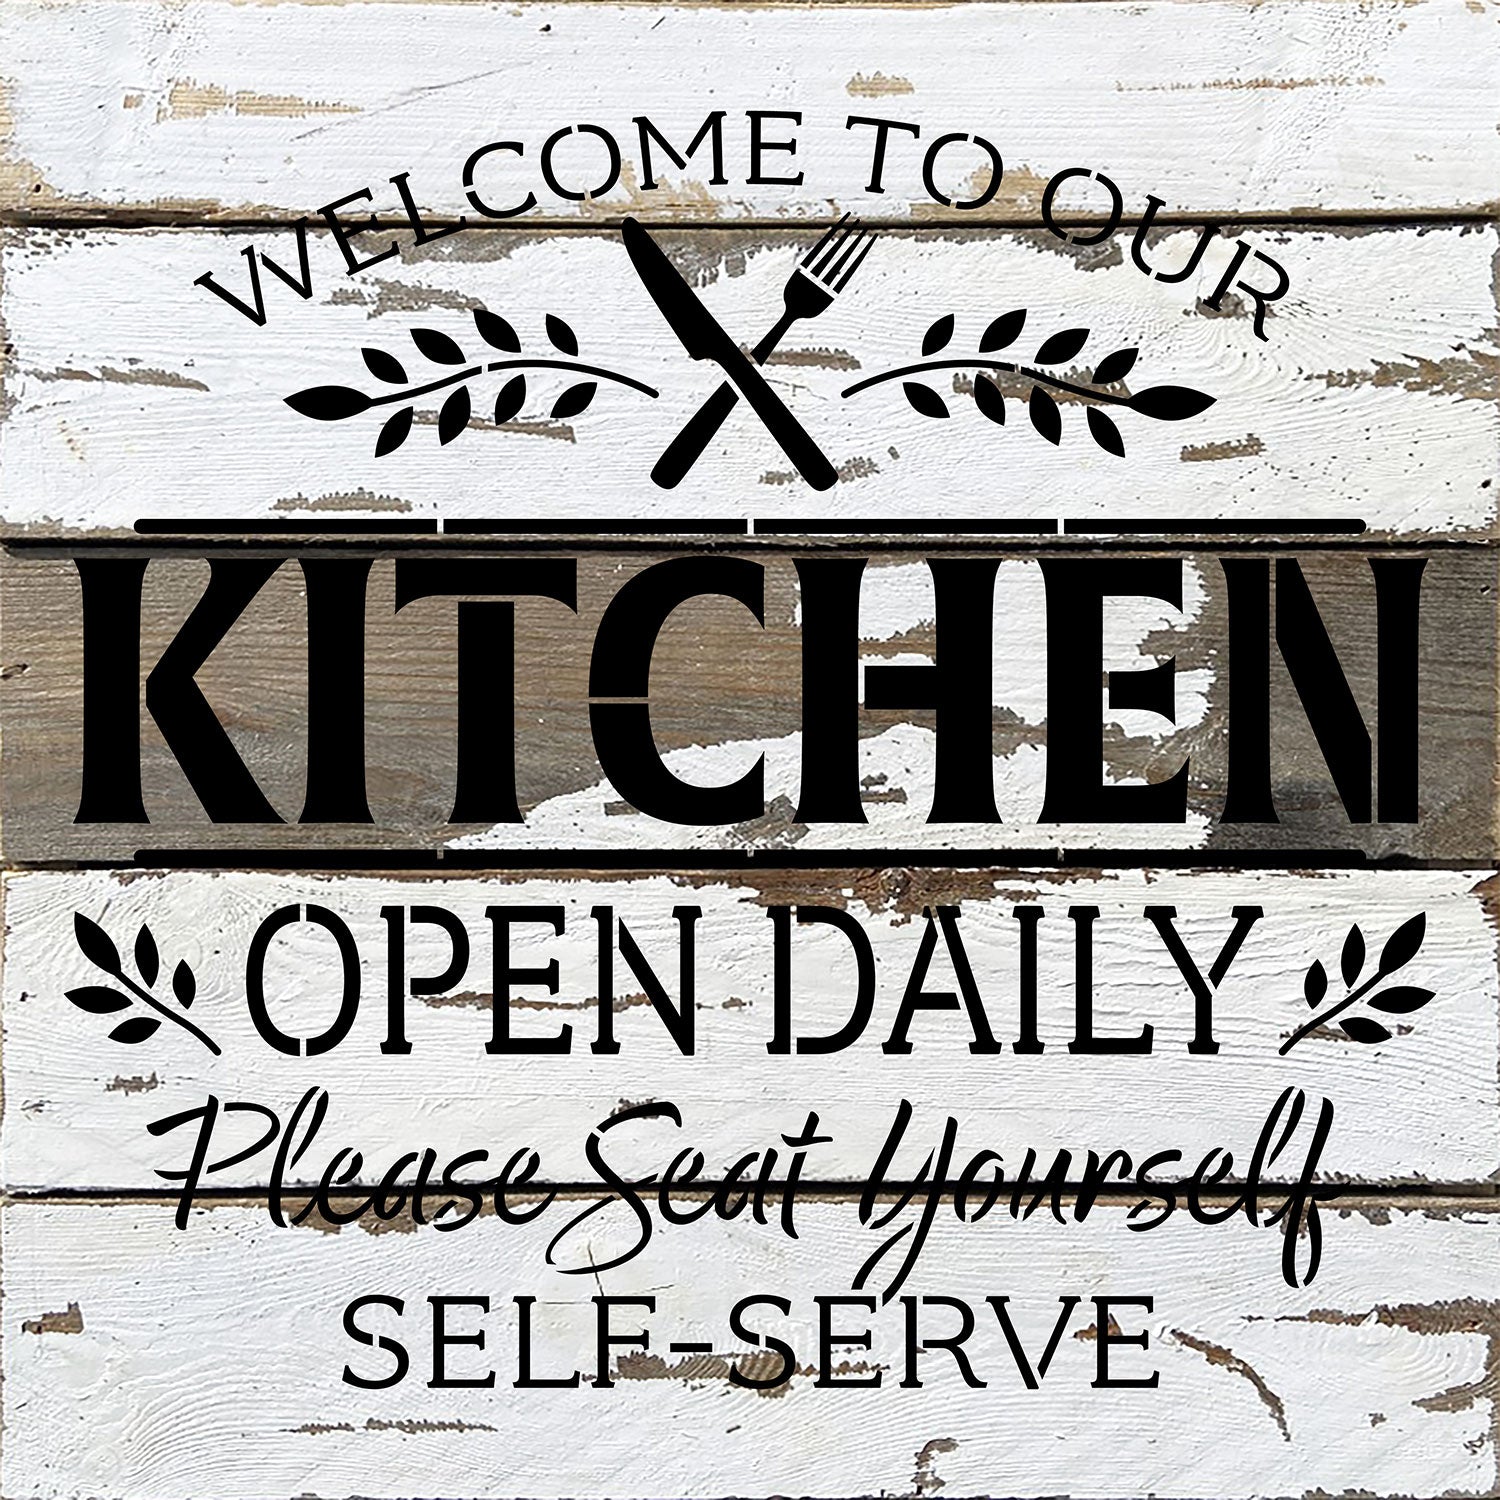 Welcome to our Kitchen Open Daily. Please seat yourself. Self-Serve / 14x14 Reclaimed Wood Wall Decor